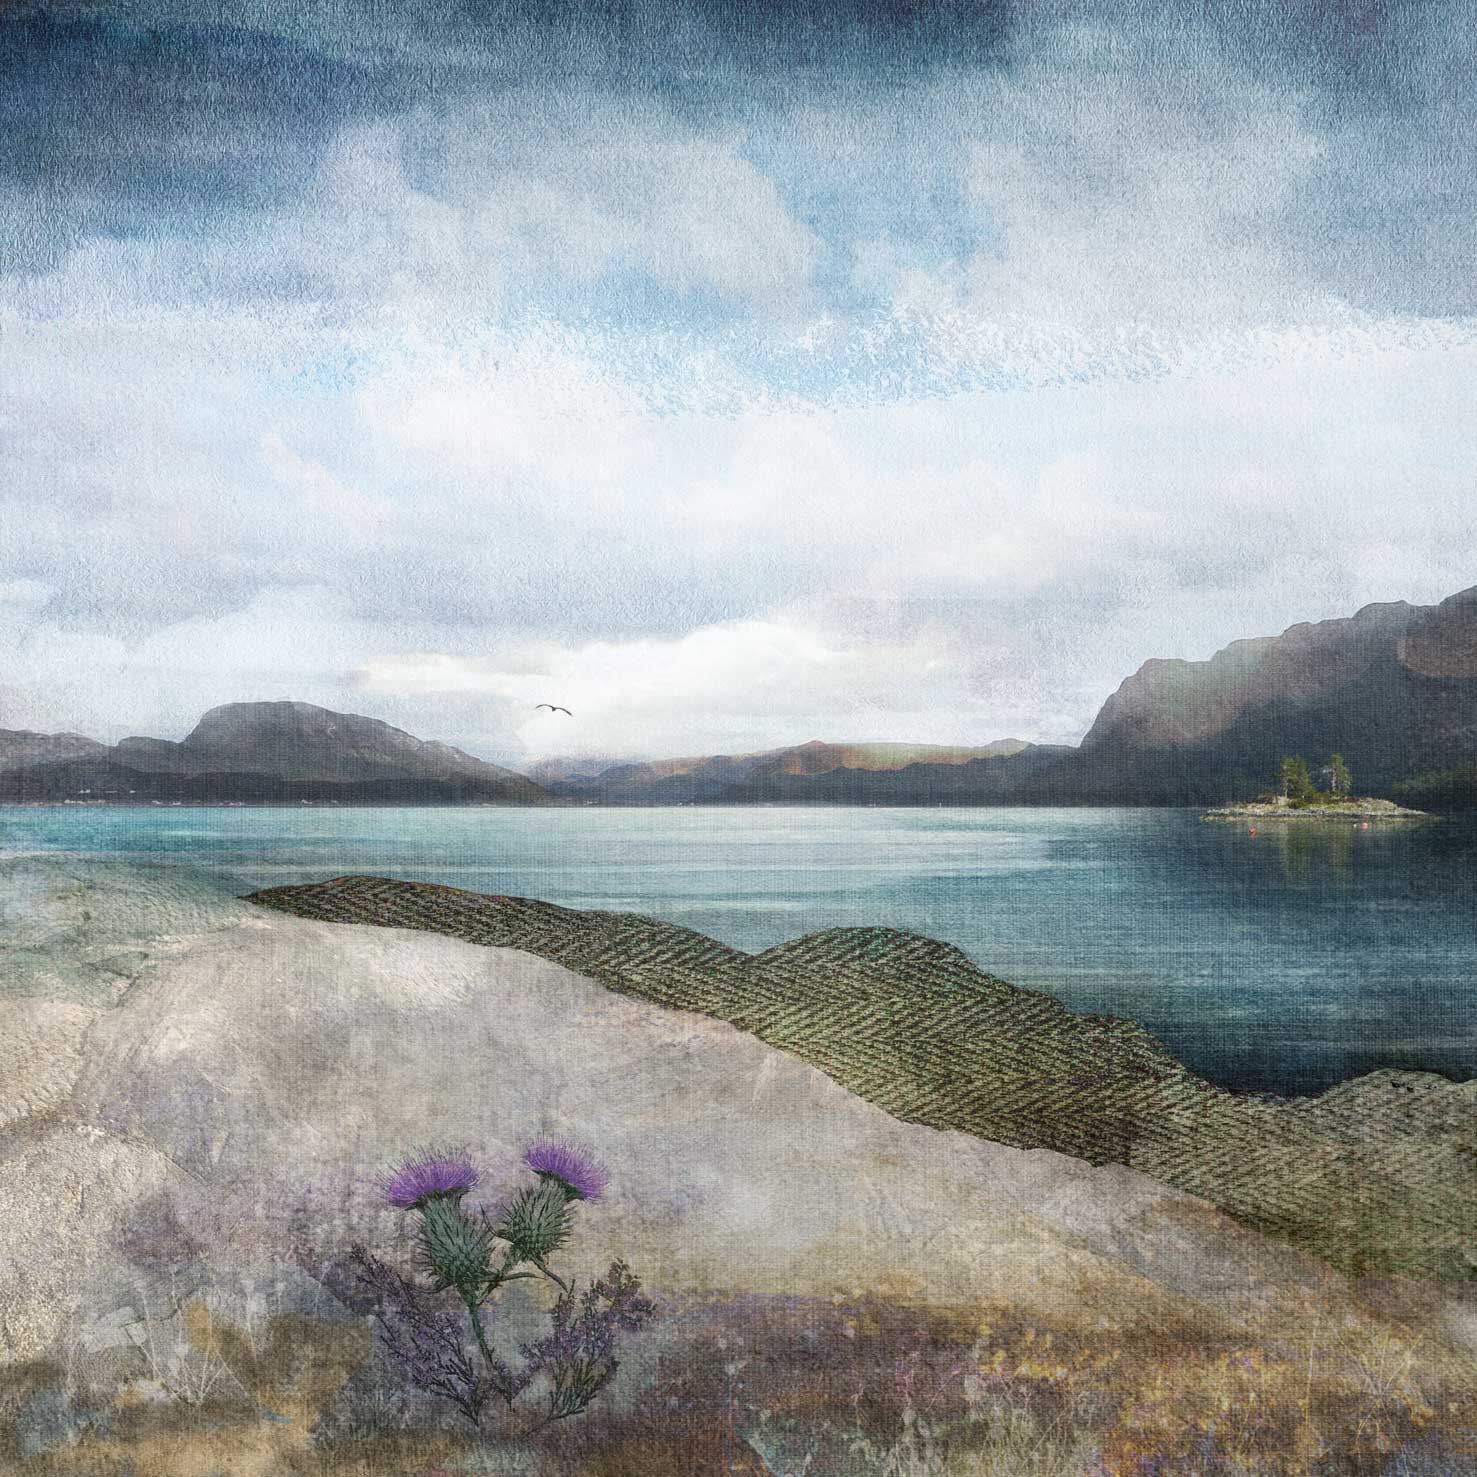 Plockton Thistles is a print with blue colours and tweed texture and a blue sea. There's mountains in the background and purple thistles in the foreground.